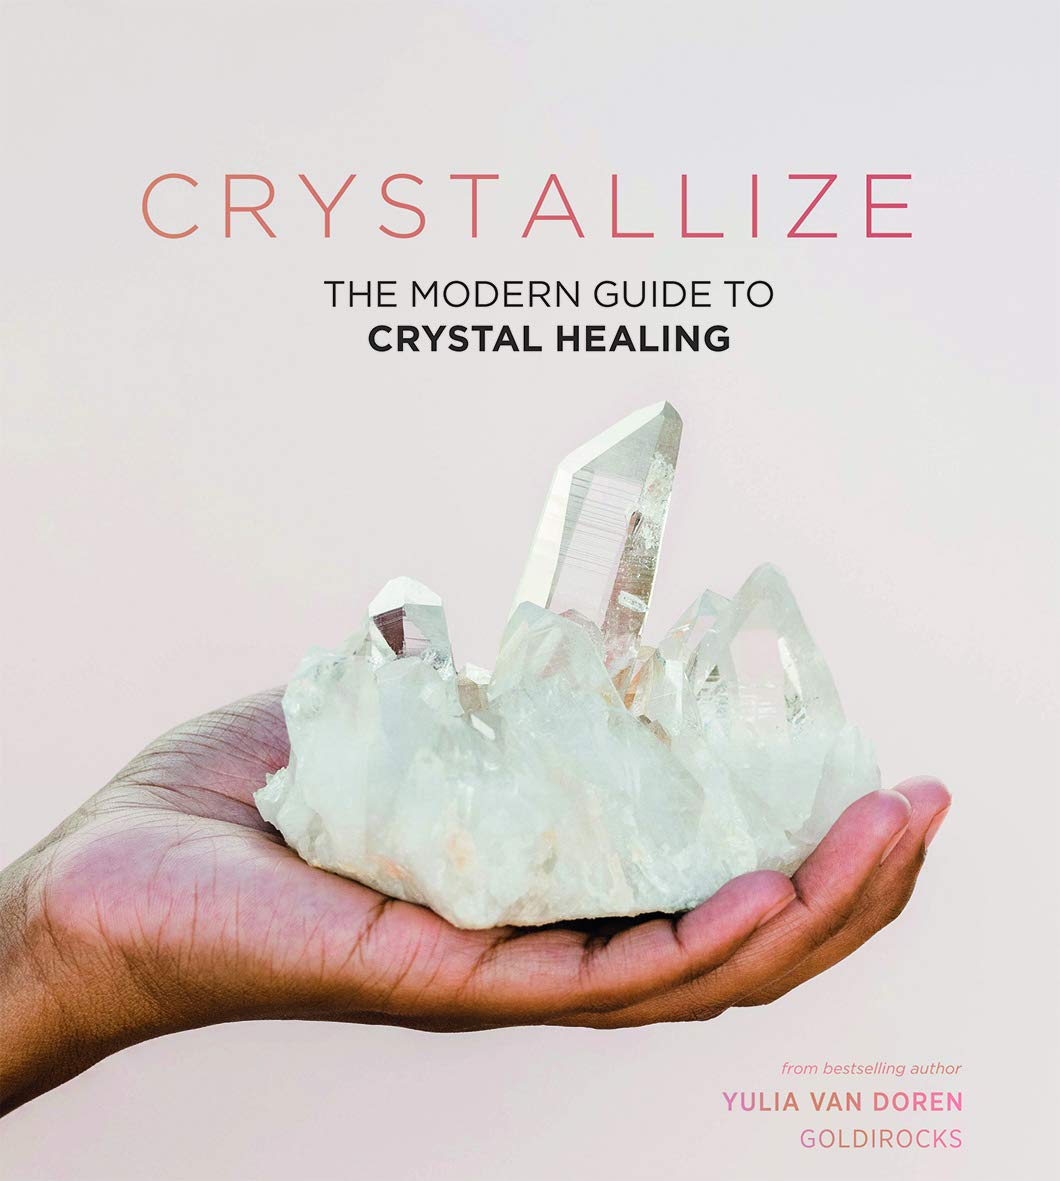 Crystallize: The Modern Guide to Crystal Healing Book by Yulia Van Doren. Crystals for Beginners. How to Use Crystals. 